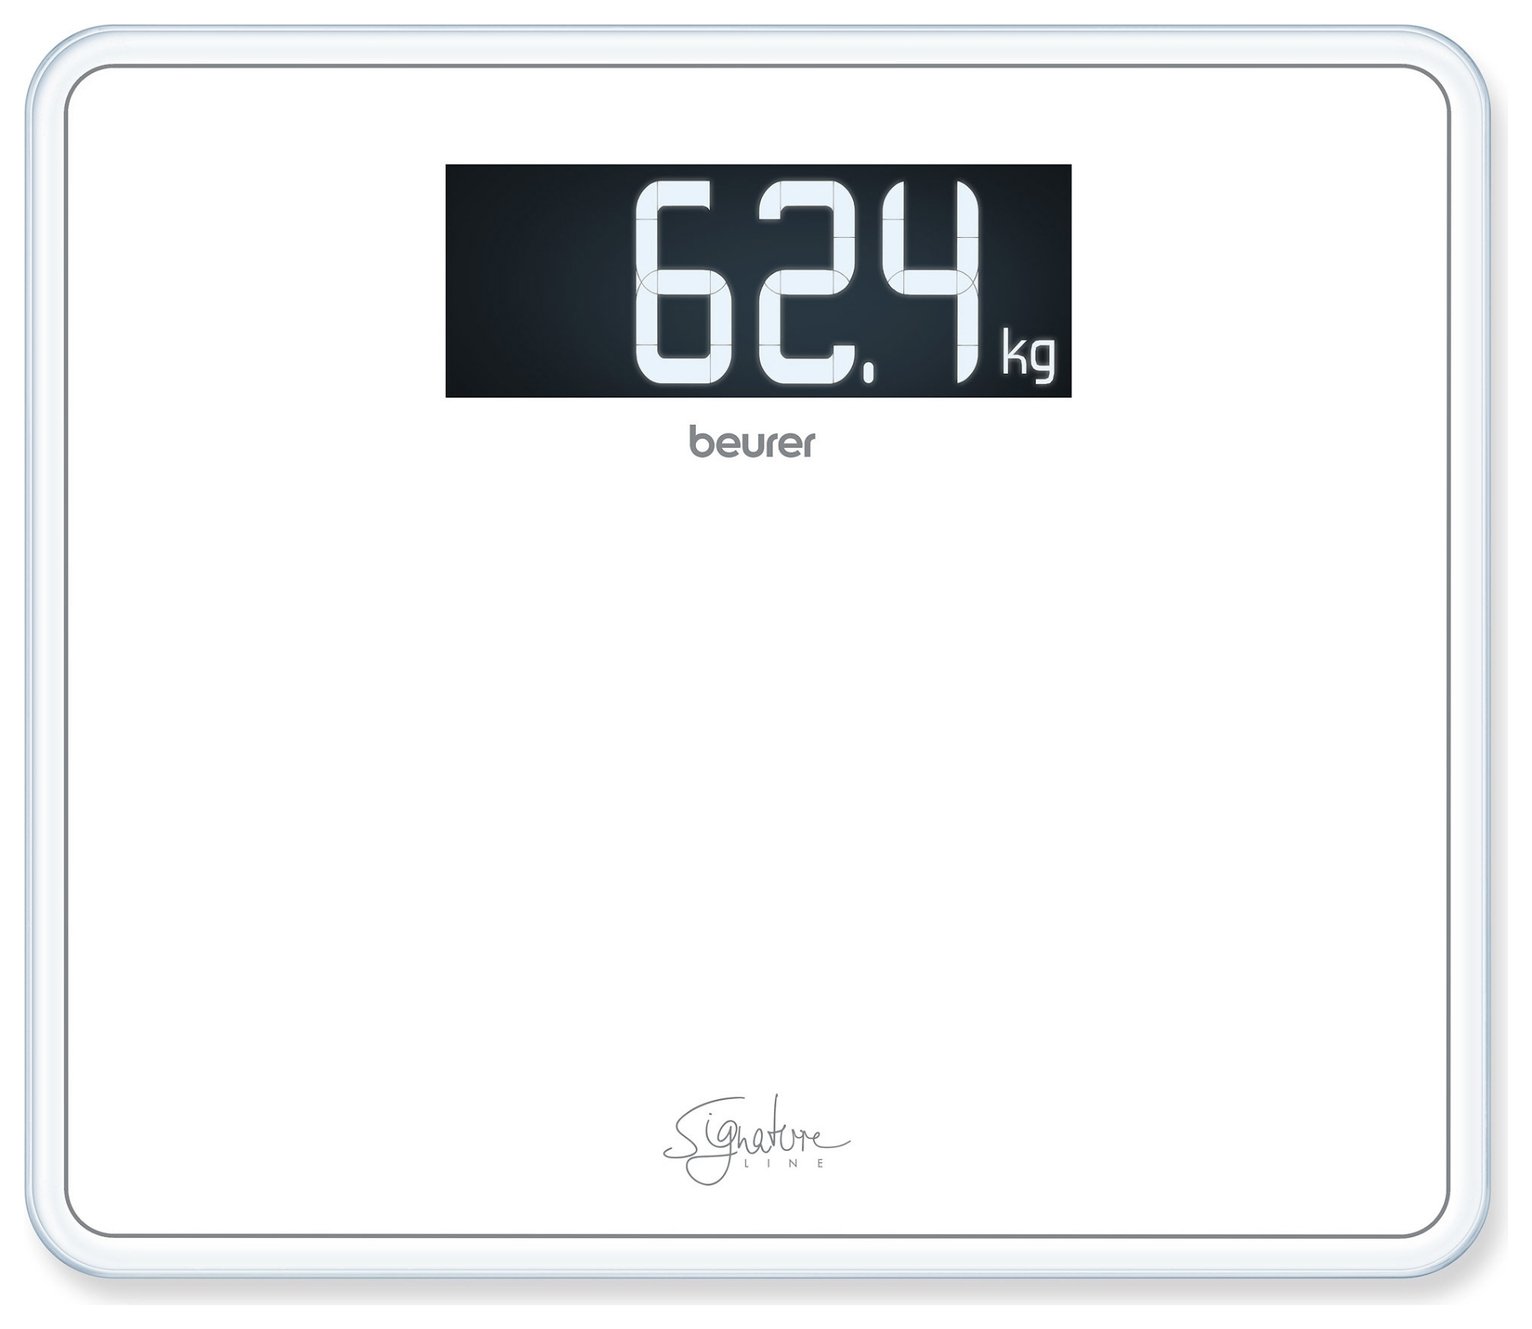 Beurer XXL Platform And Display Scale - White 